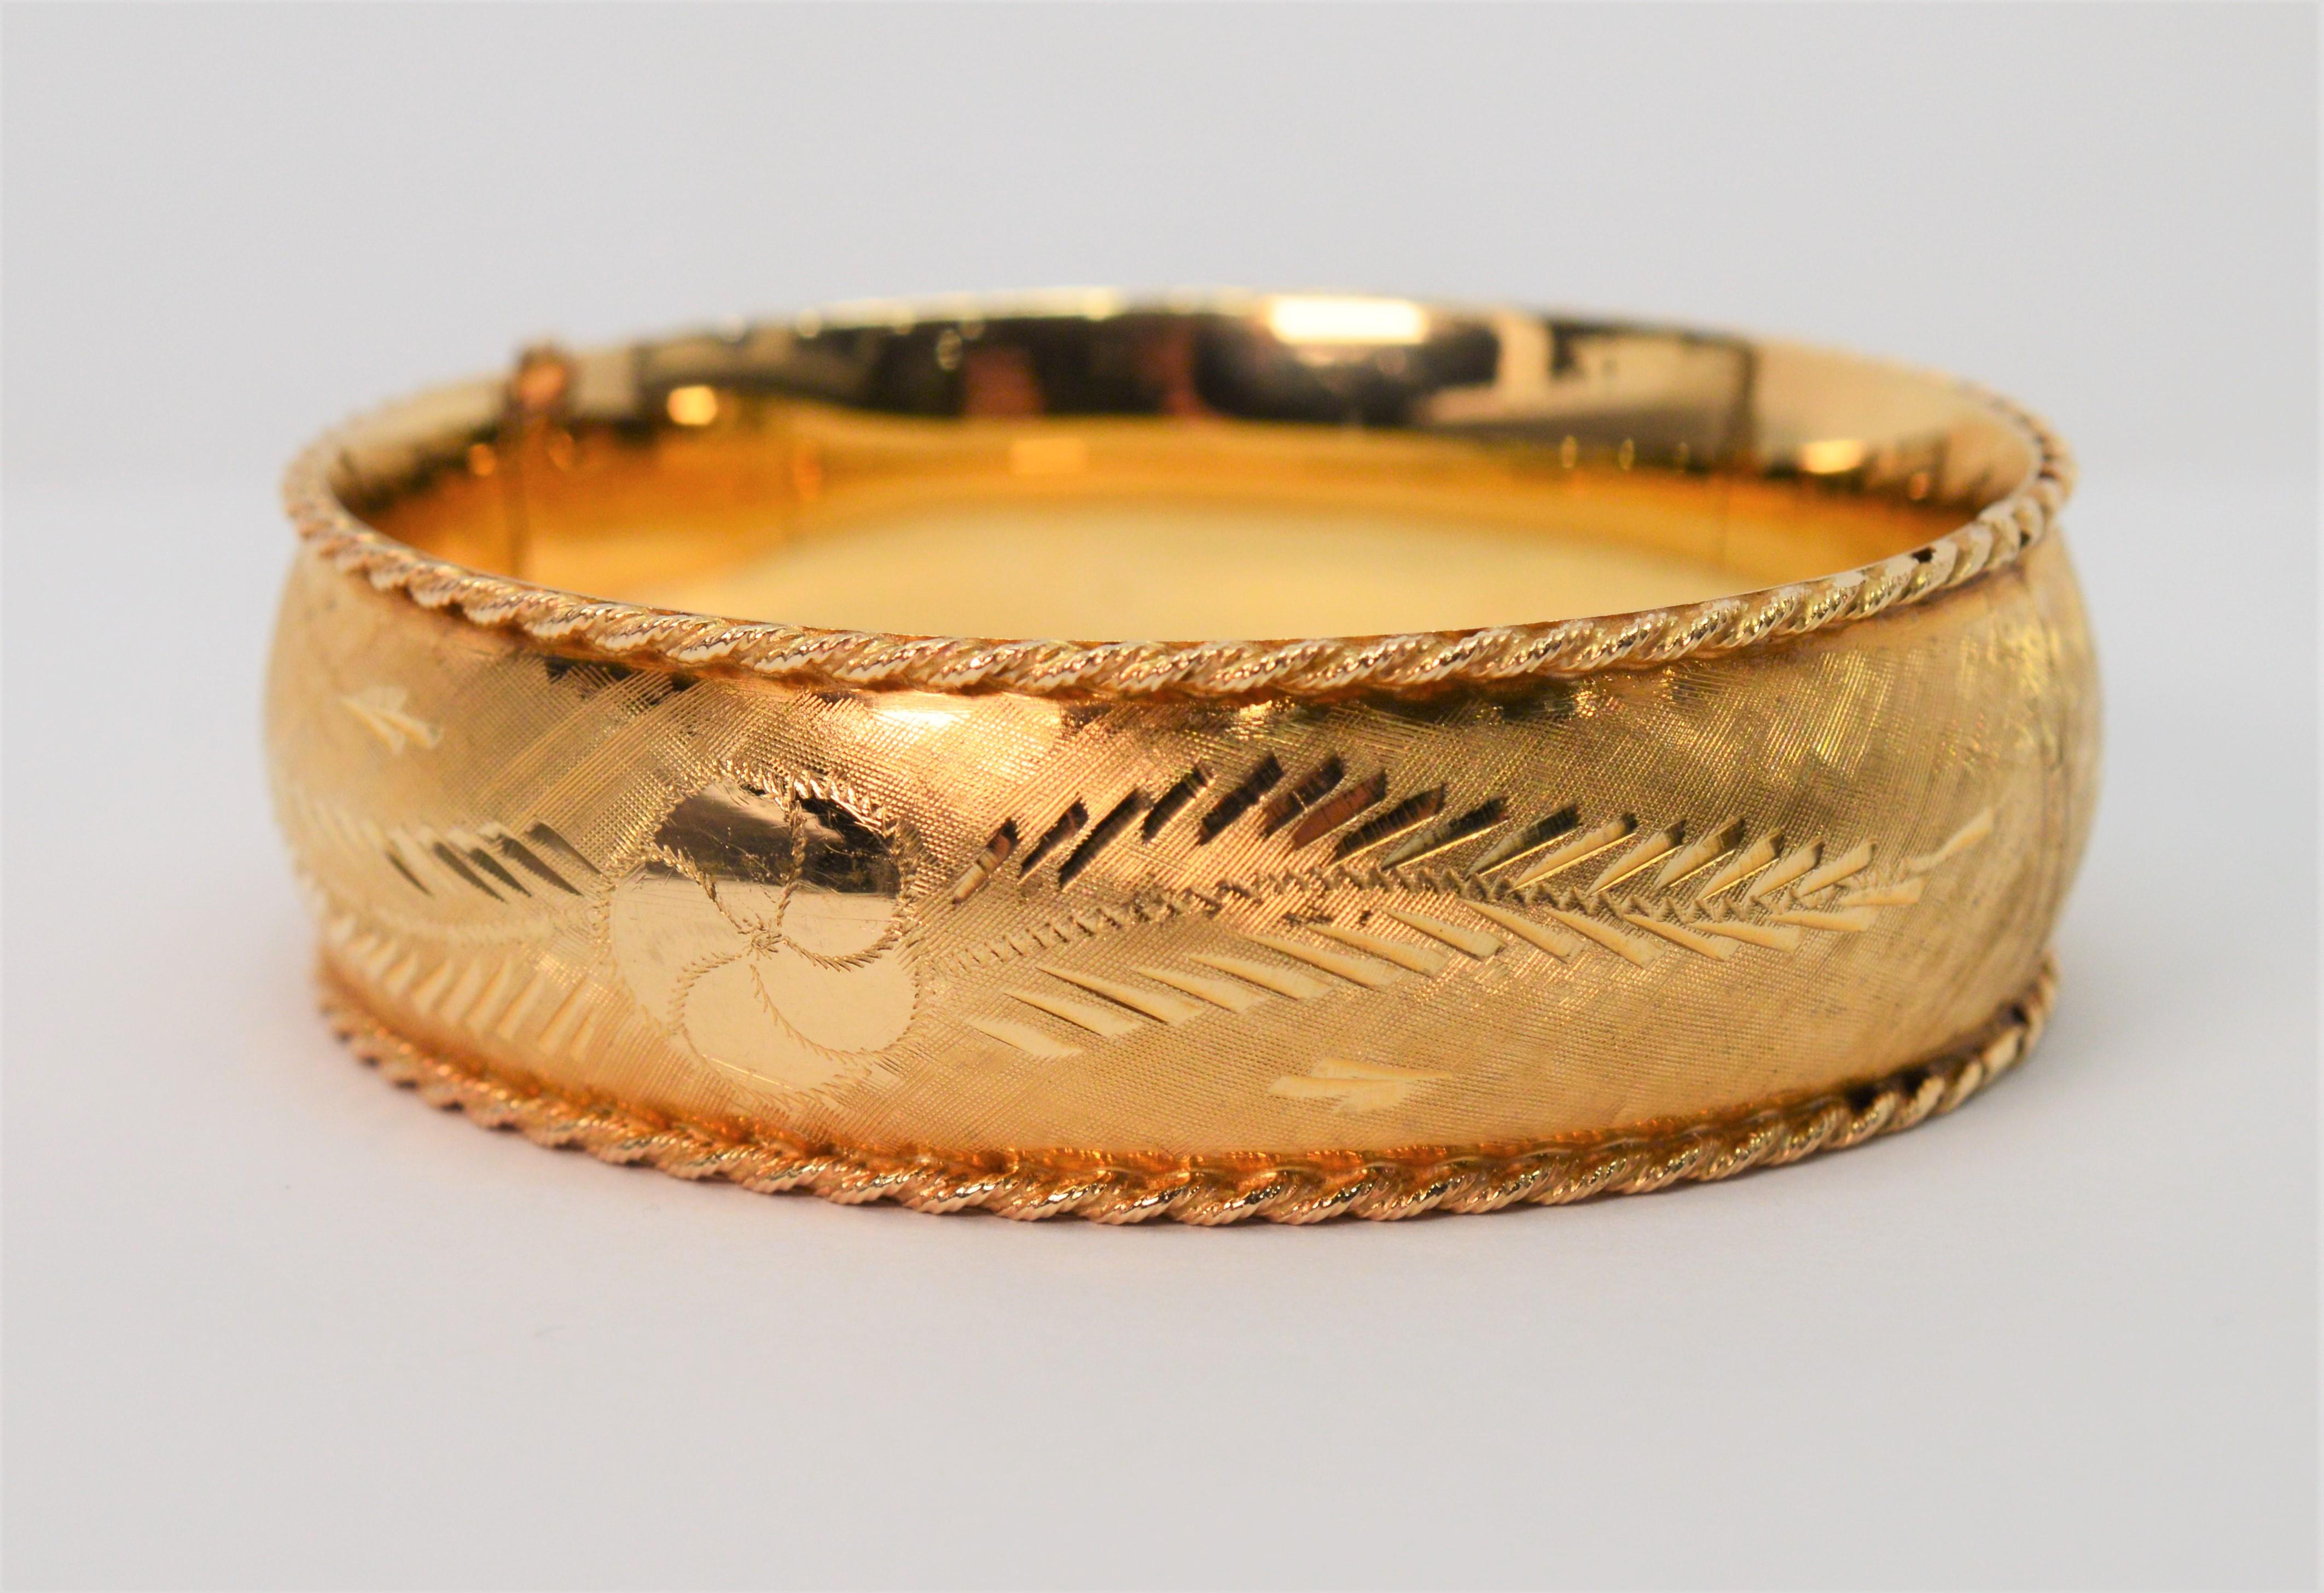 The defining beauty of complimenting satin and bright gold finishes along with an accomplished display of hand engraved textures makes this 14K fourteen karat yellow gold bangle remarkable.
Its floral leaf inspired design appears both front and